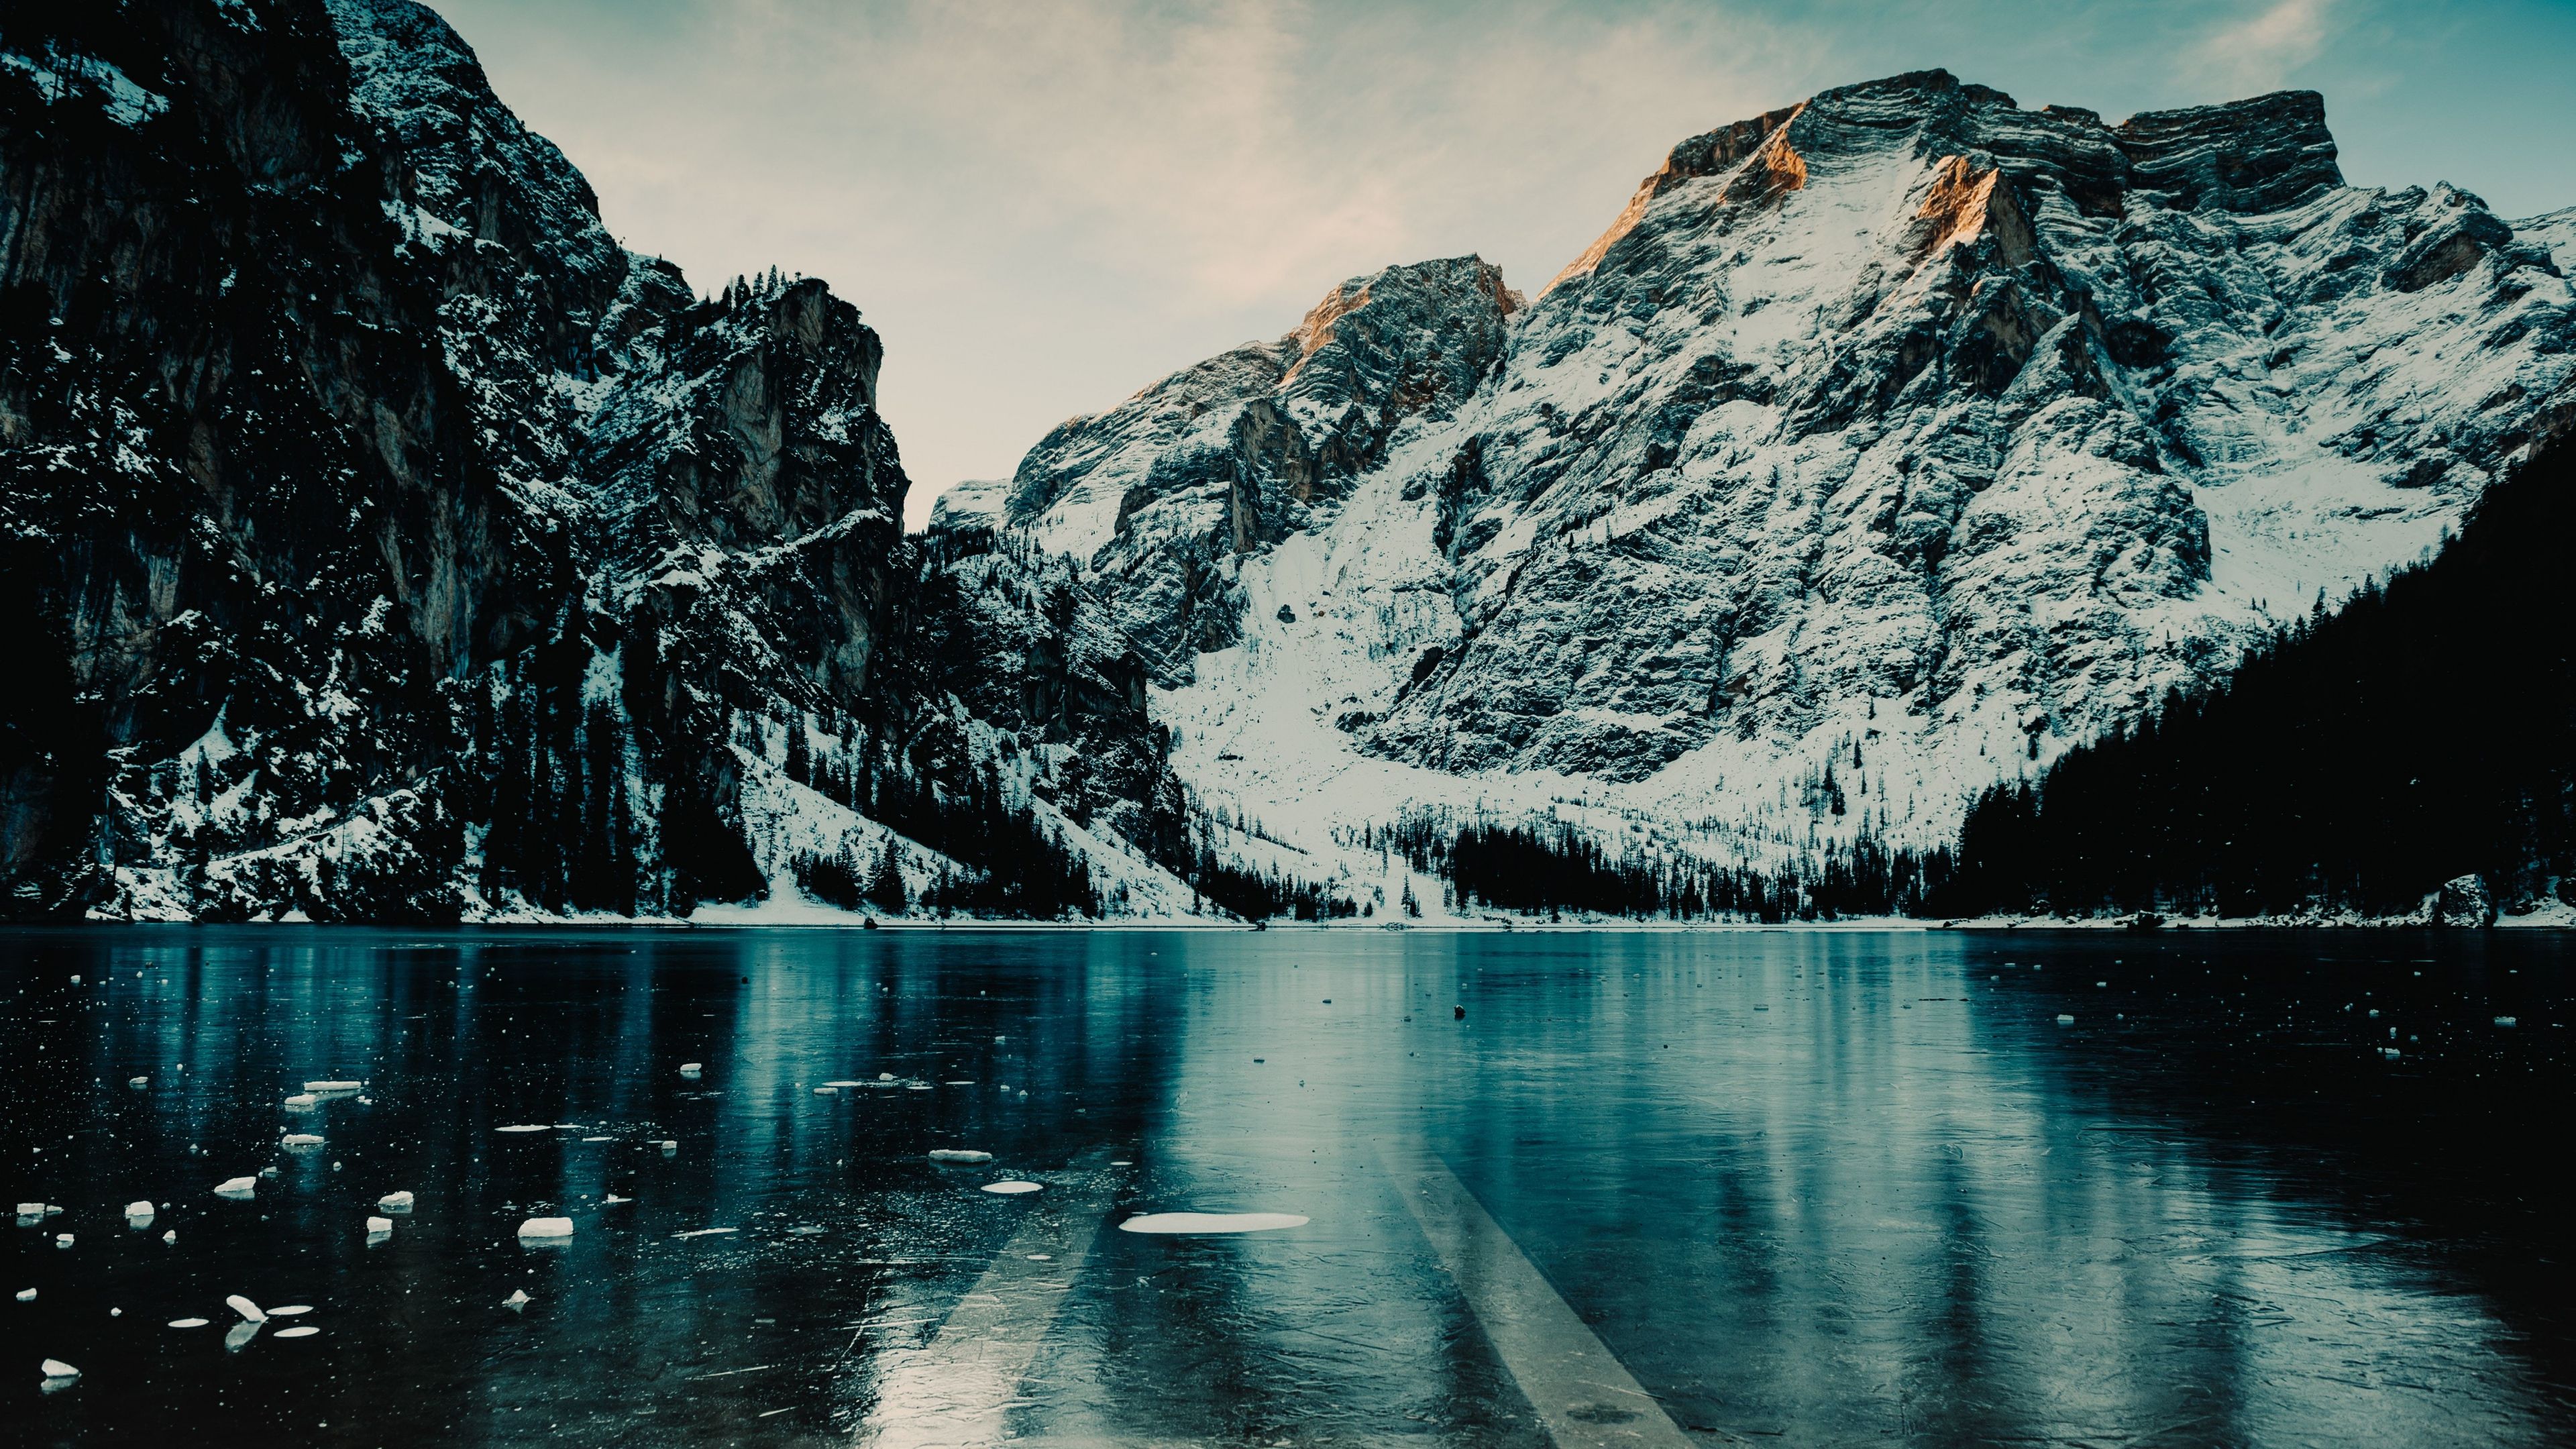 Download 3840x2160 wallpaper winter, mountains, floating ice, lake, nature, 4k, uhd 16: widescreen, 3840x2160 HD image, background, 9598